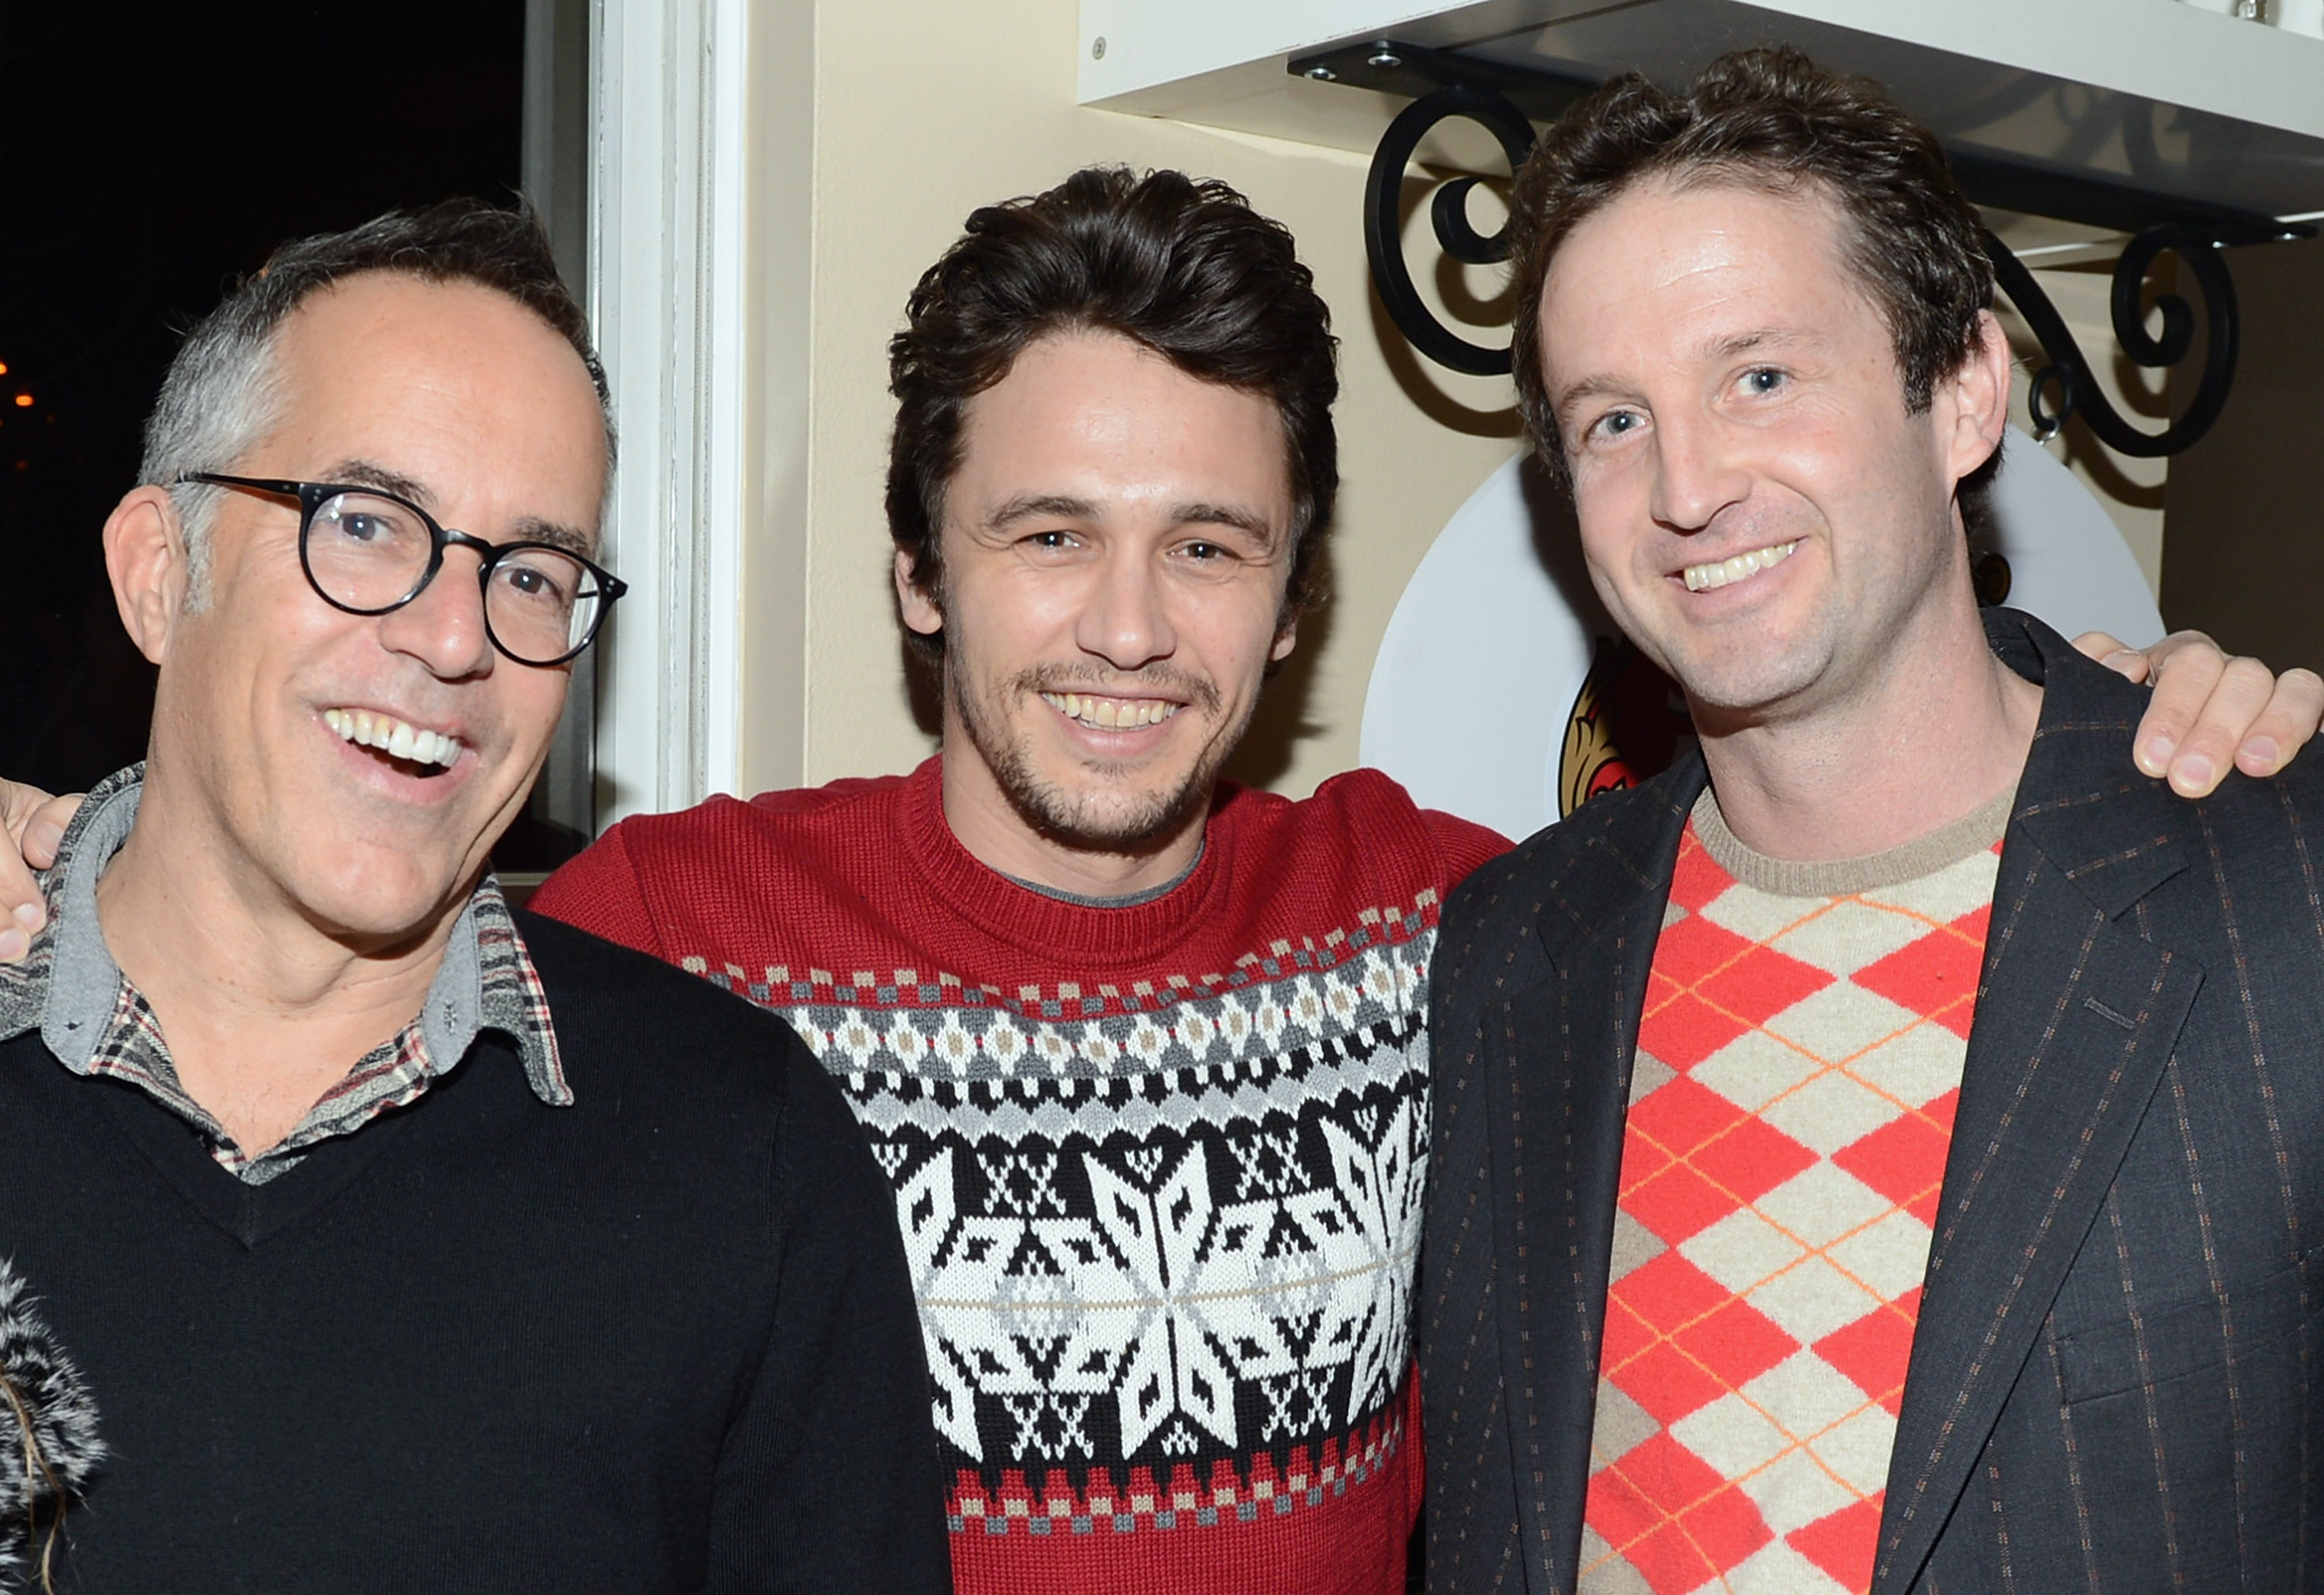 PARK CITY, UT - JANUARY 19:  (L-R) Sundance Festival Director John Cooper, actor James Franco and Sundance Director of Programming Trevor Groth attend the press dinner for James Franco hosted by Stella Artois at the Stella Artois Cafe at Village at The Lift on January 19, 2013 in Park City, Utah.  (Photo by Andrew H. Walker/Getty Images for Stella Artois)